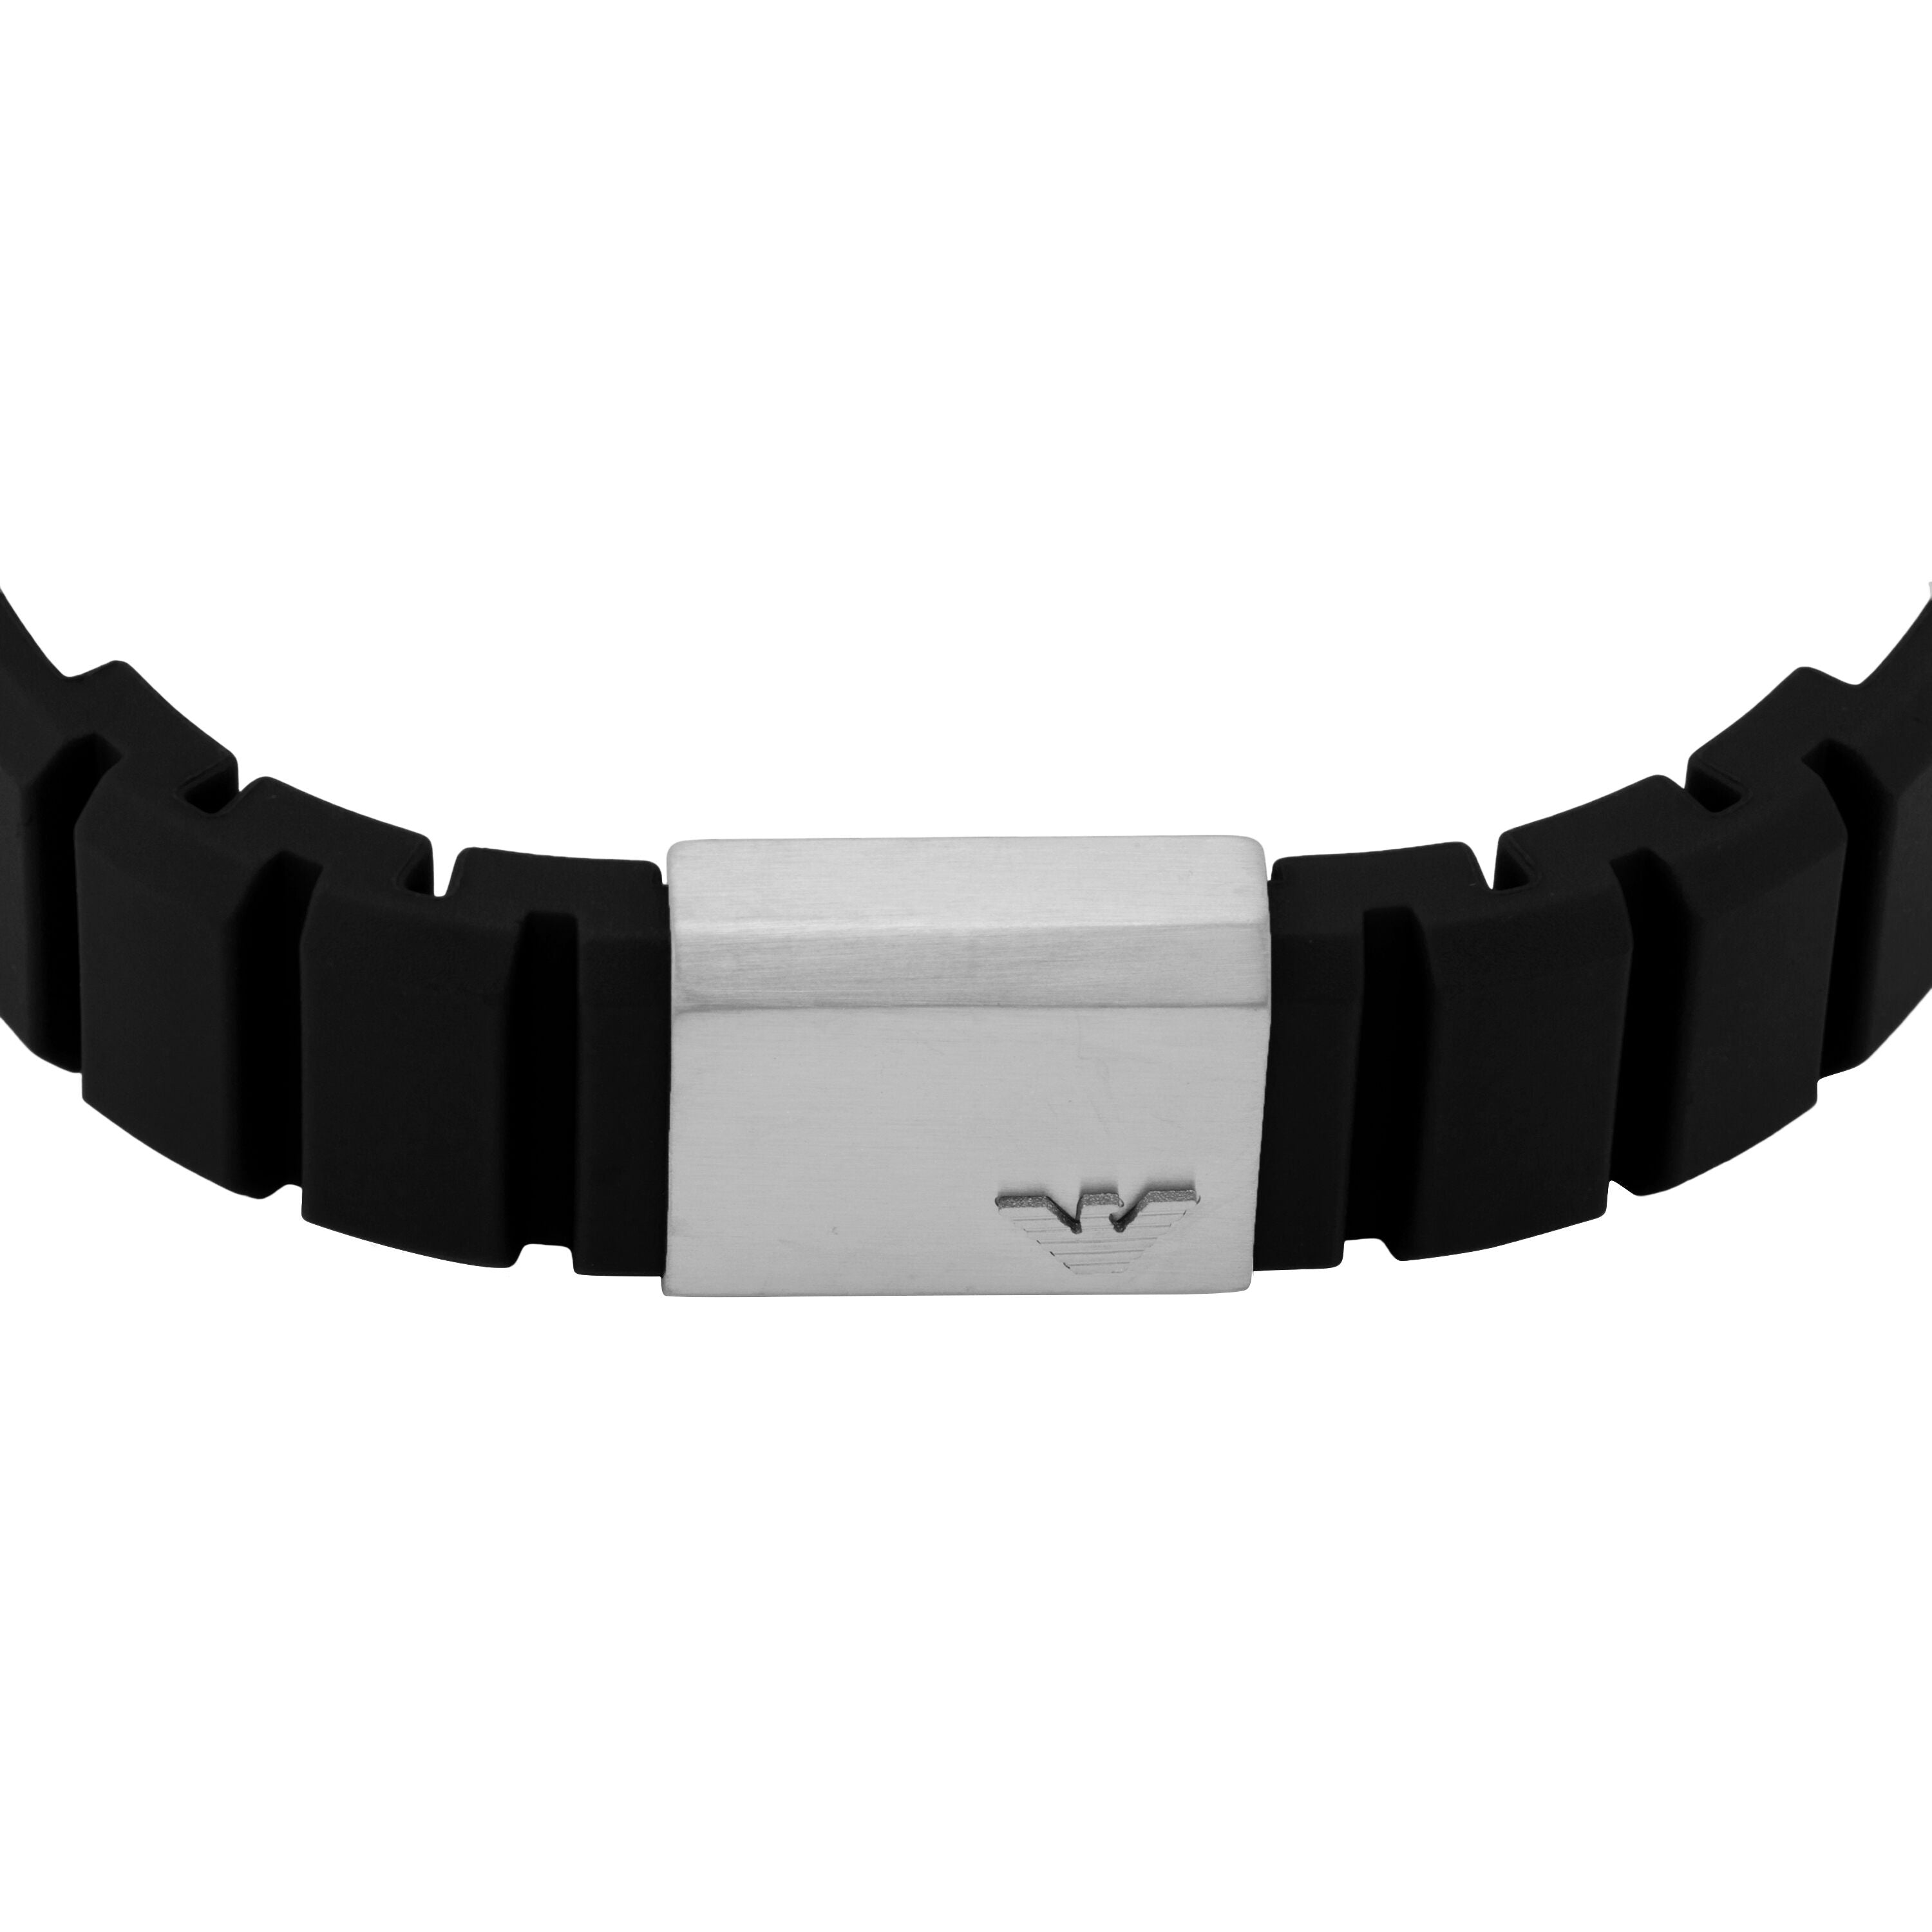 Emporio Armani Men's Asymmetrical Stainless Steel Chain Bracelet EGS2805040  - First Class Watches™ HKG